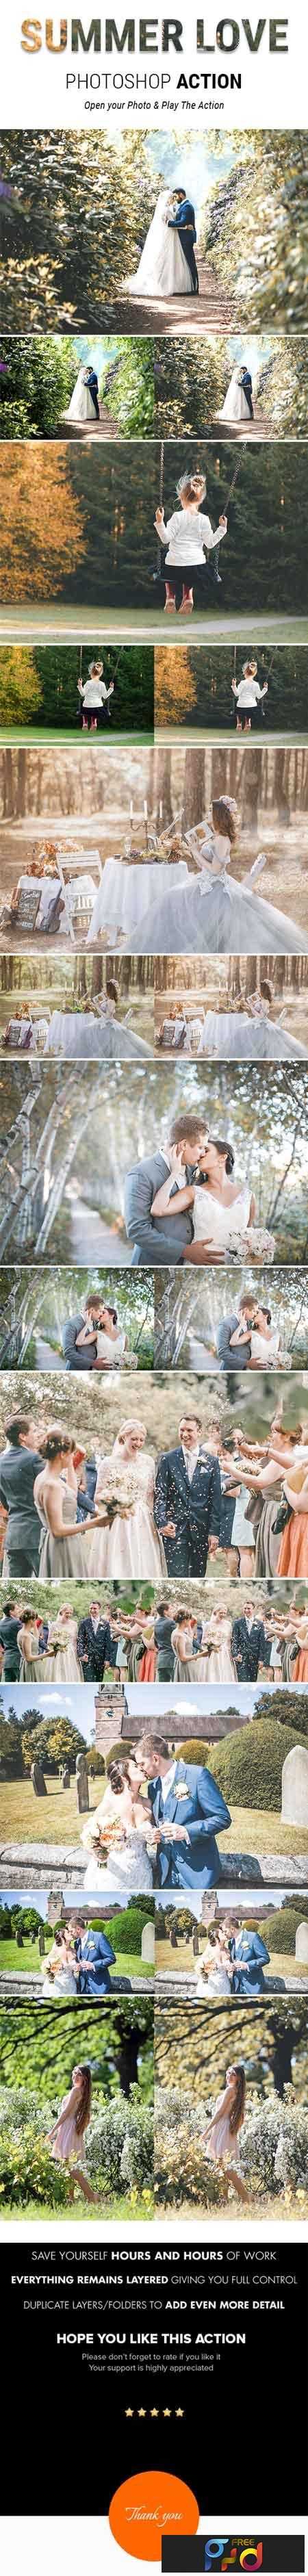 Summer Love   Romantic Summer Effects Photoshop Action for Wedding Photography